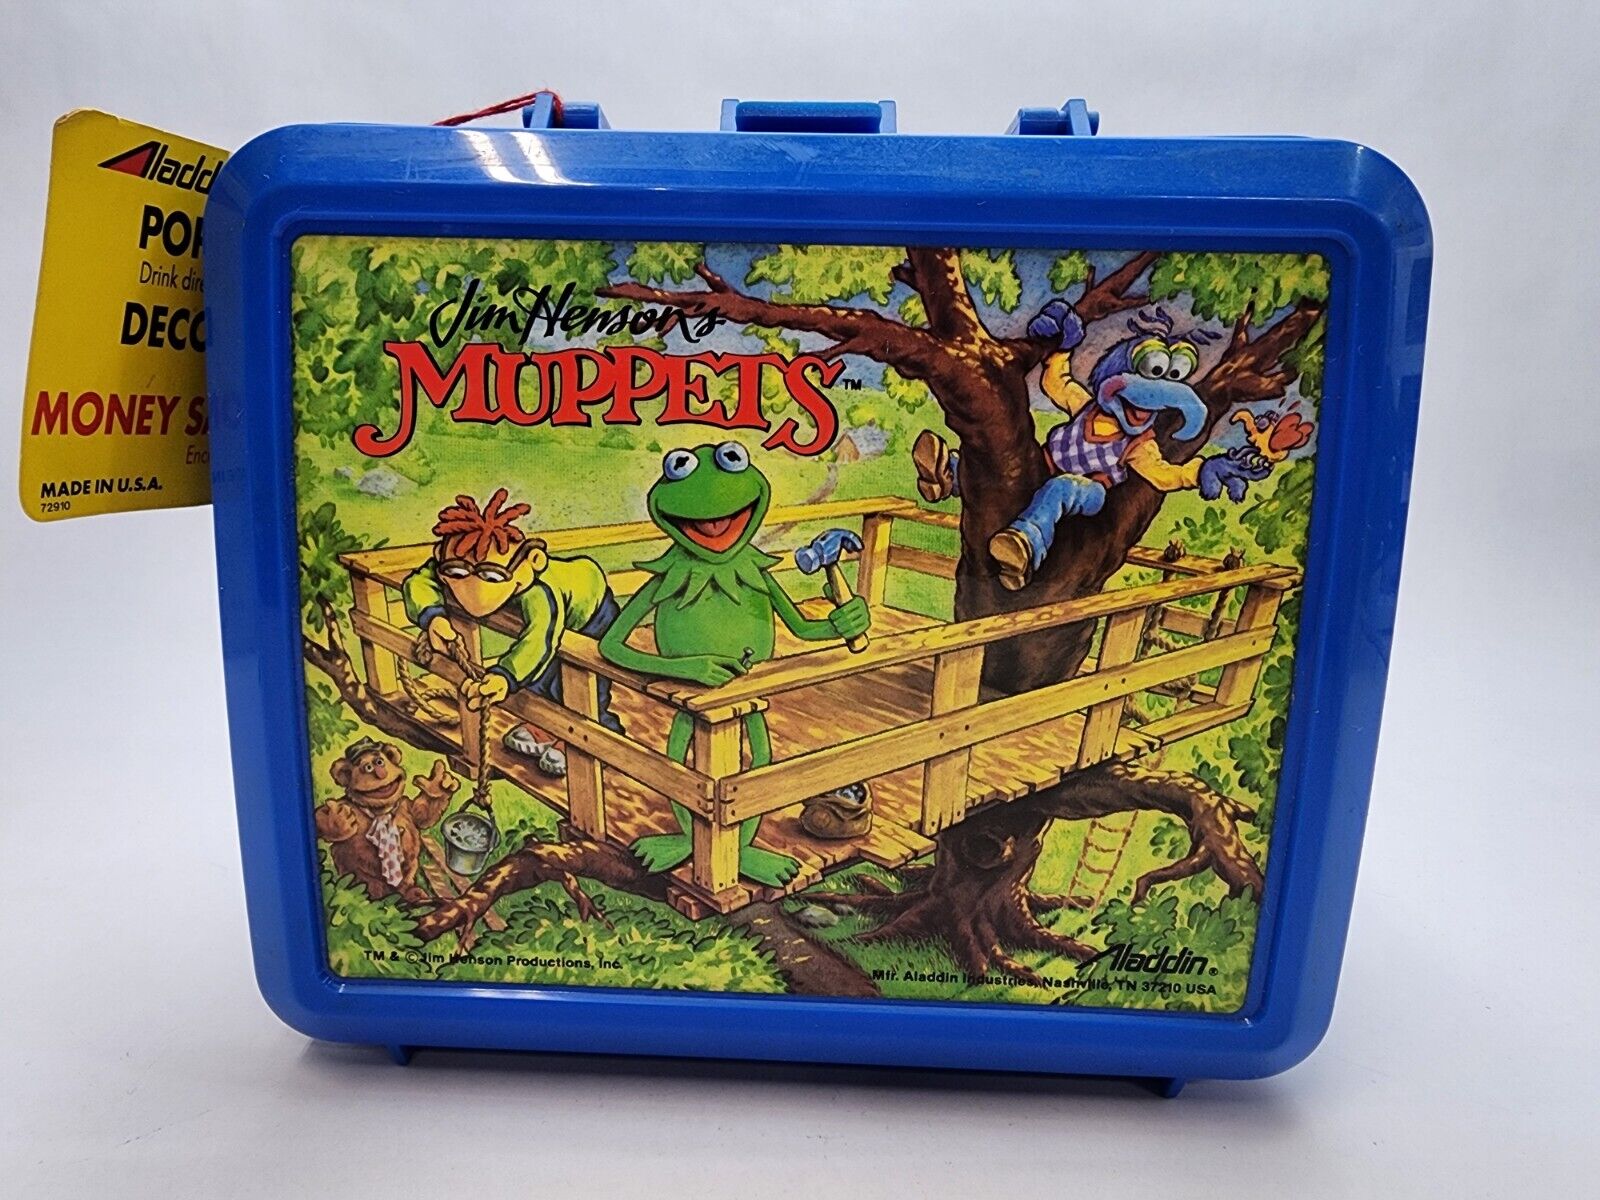 Jim Henson Muppets Vintage Aladdin Lunch Box with thermos 1992 W Org Tags Insert